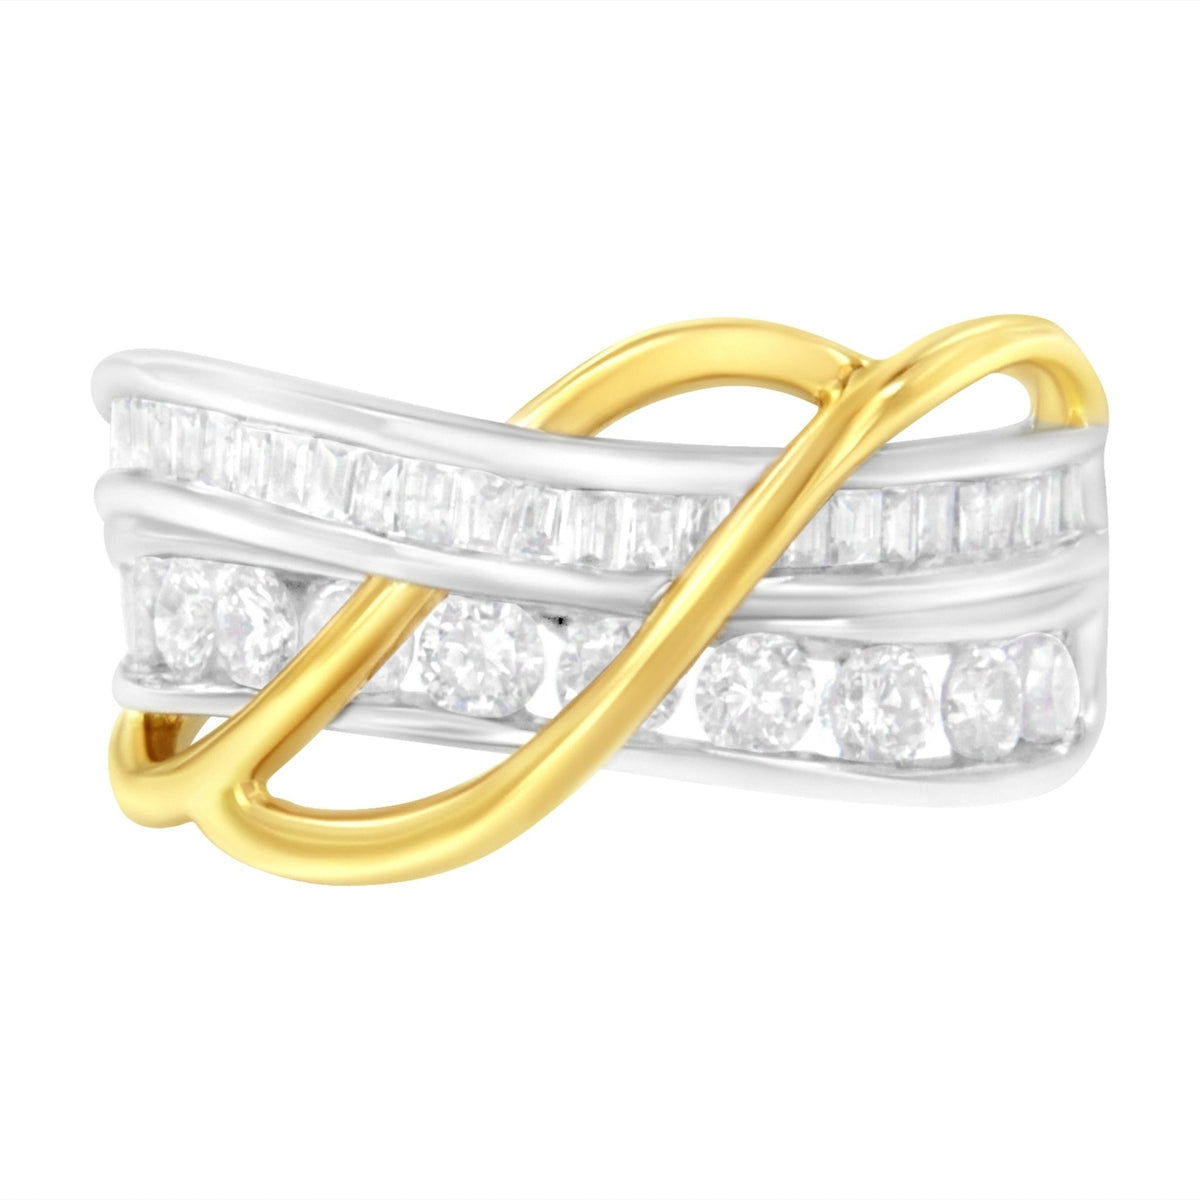 10K White and Yellow Gold 1 1/10 cttw Channel-Set Diamond Bypass Band Ring (J Color, I3 Clarity) – Size 9 - LinkagejewelrydesignLinkagejewelrydesign